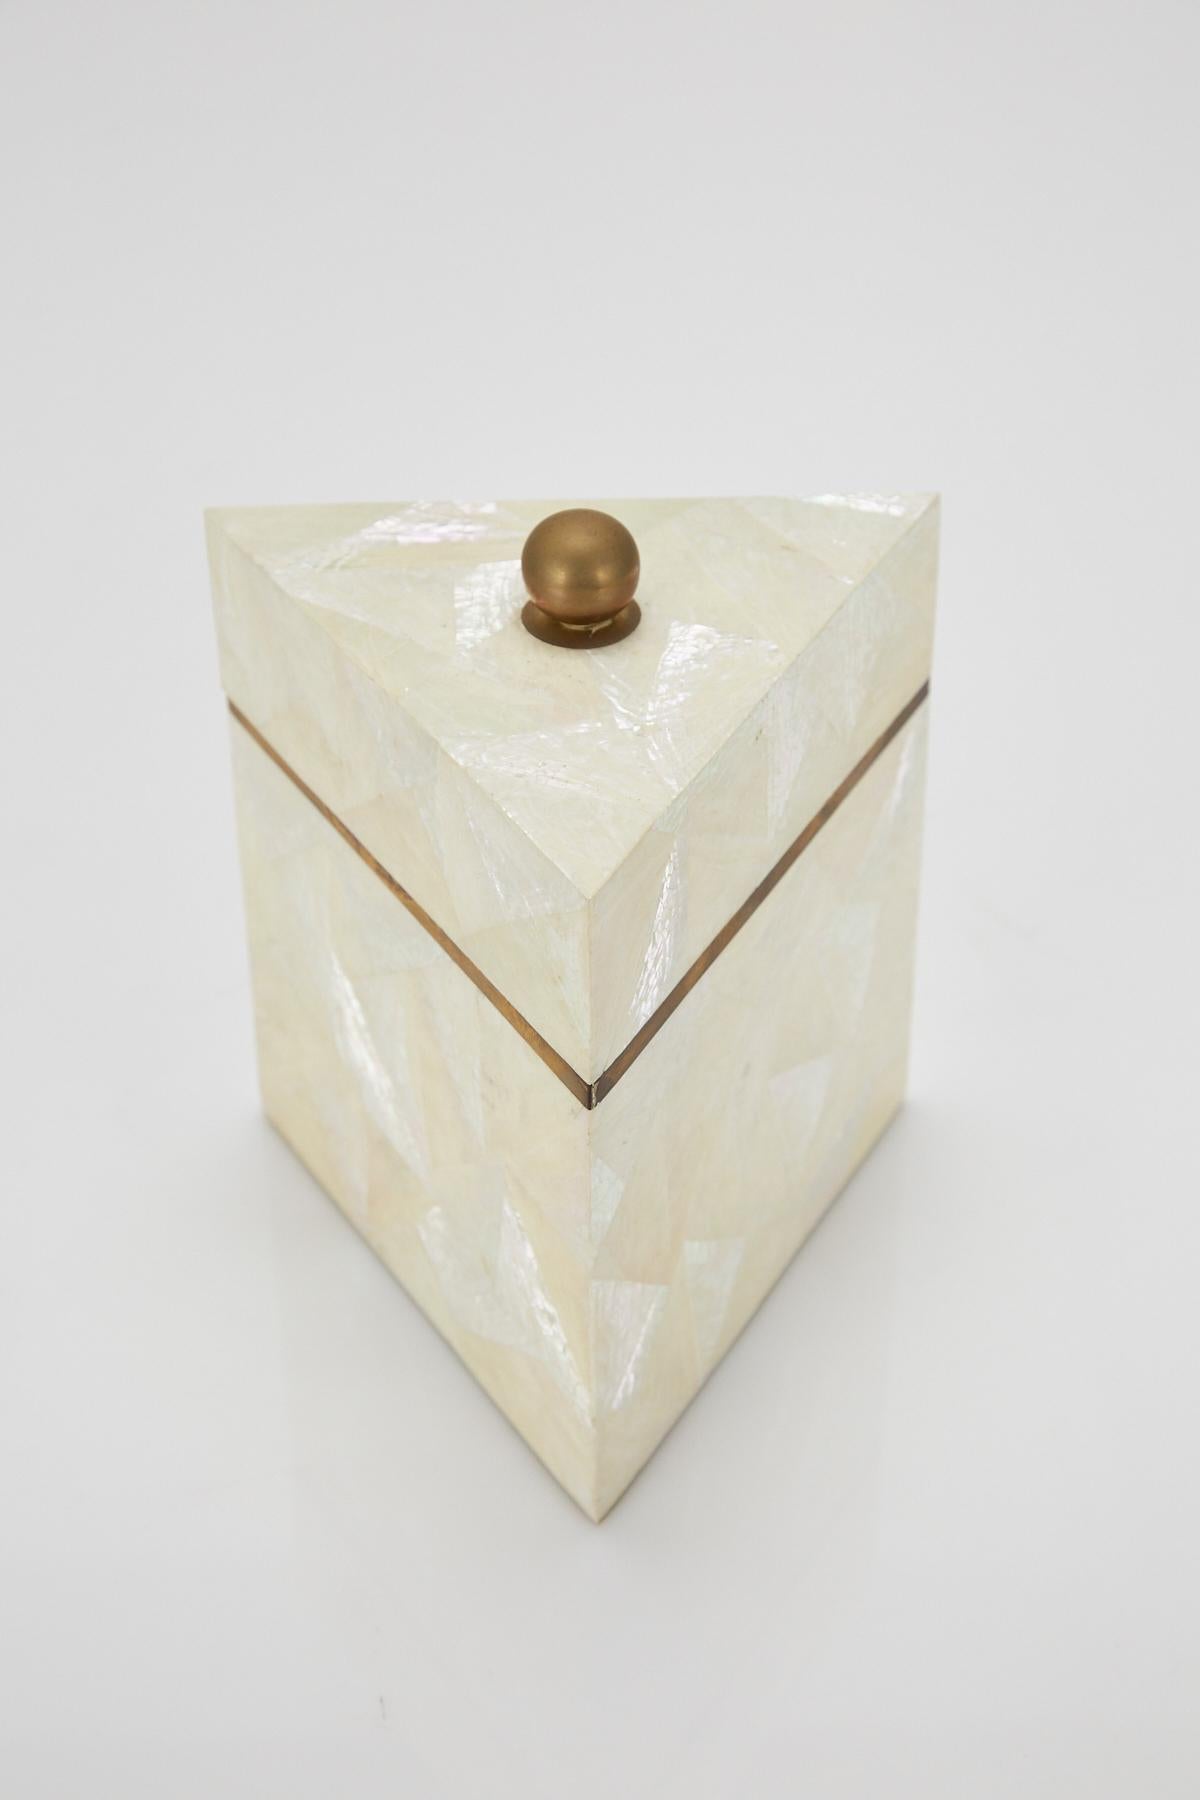 Tall triangular decorative box or tea caddy. Exterior completely covered in tessellated white stone and white chamber nautilus shell. Interior of box lined in wood. Brass edging and spherical handle.
Coordinates with item LU1484212589641.

All